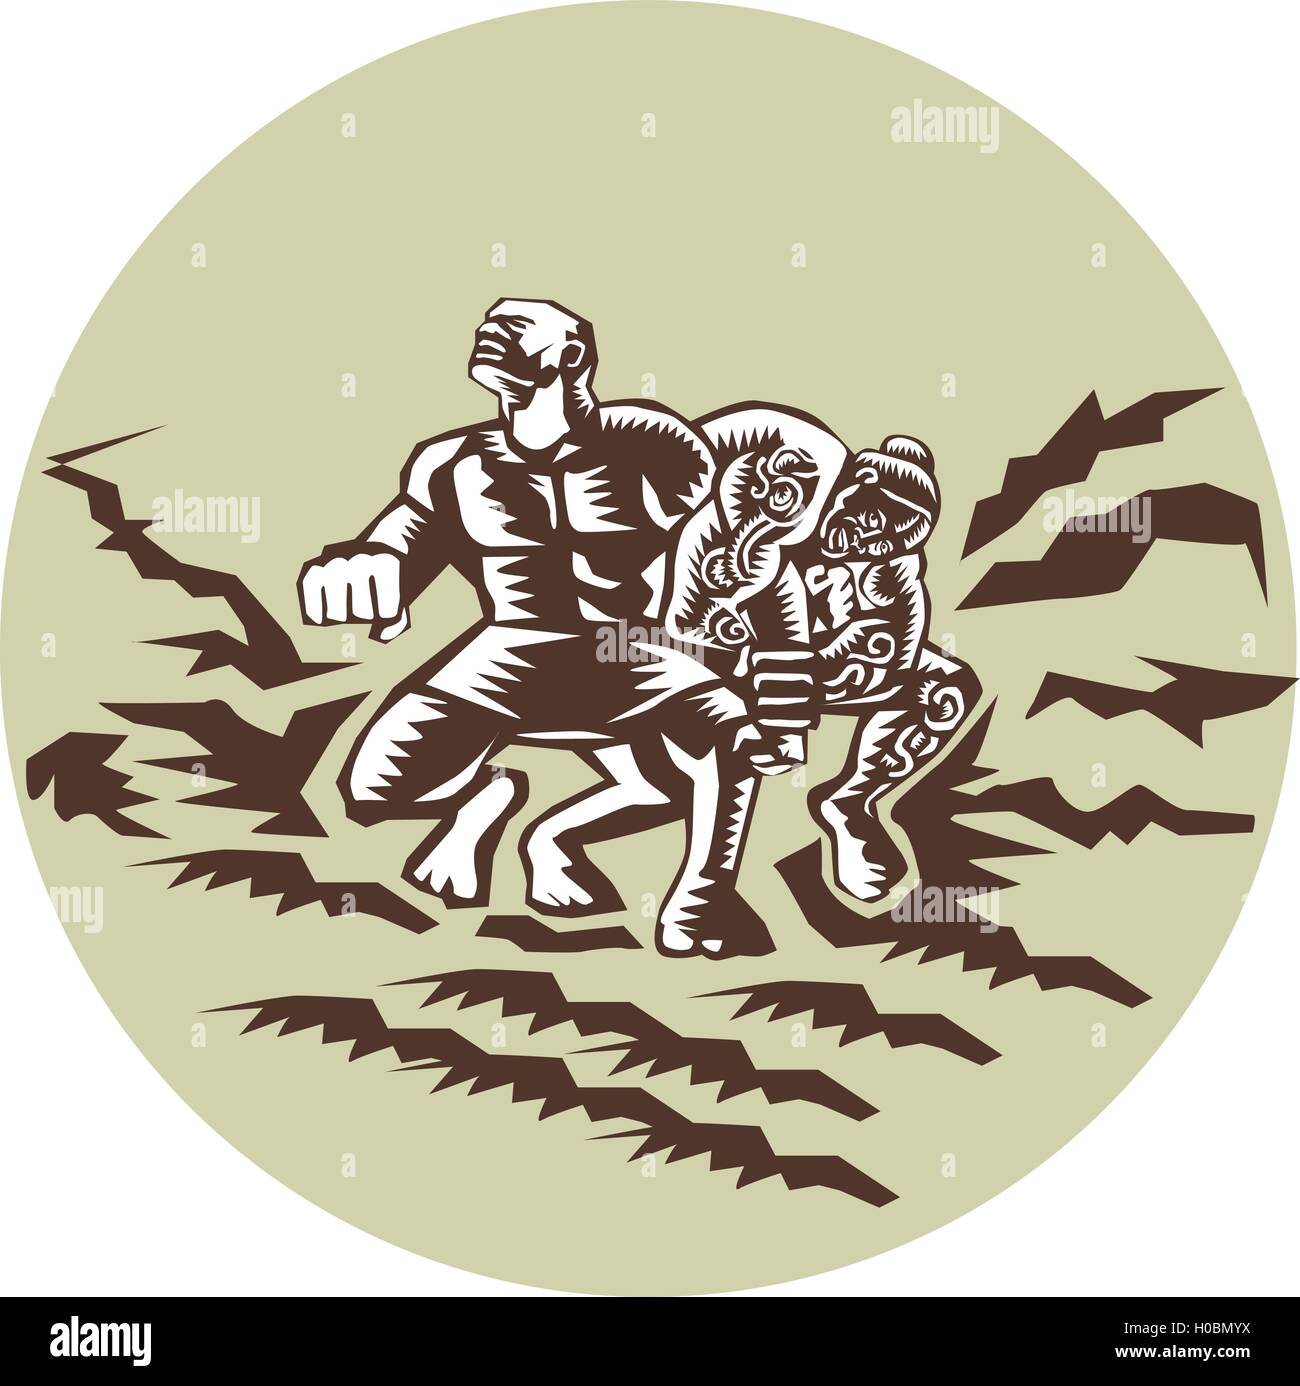 Illustration of Samoan legend Tiitii wrestling the God of Earthquake and breaking his arm set omsode circle done in retro woodcut style. Stock Vector